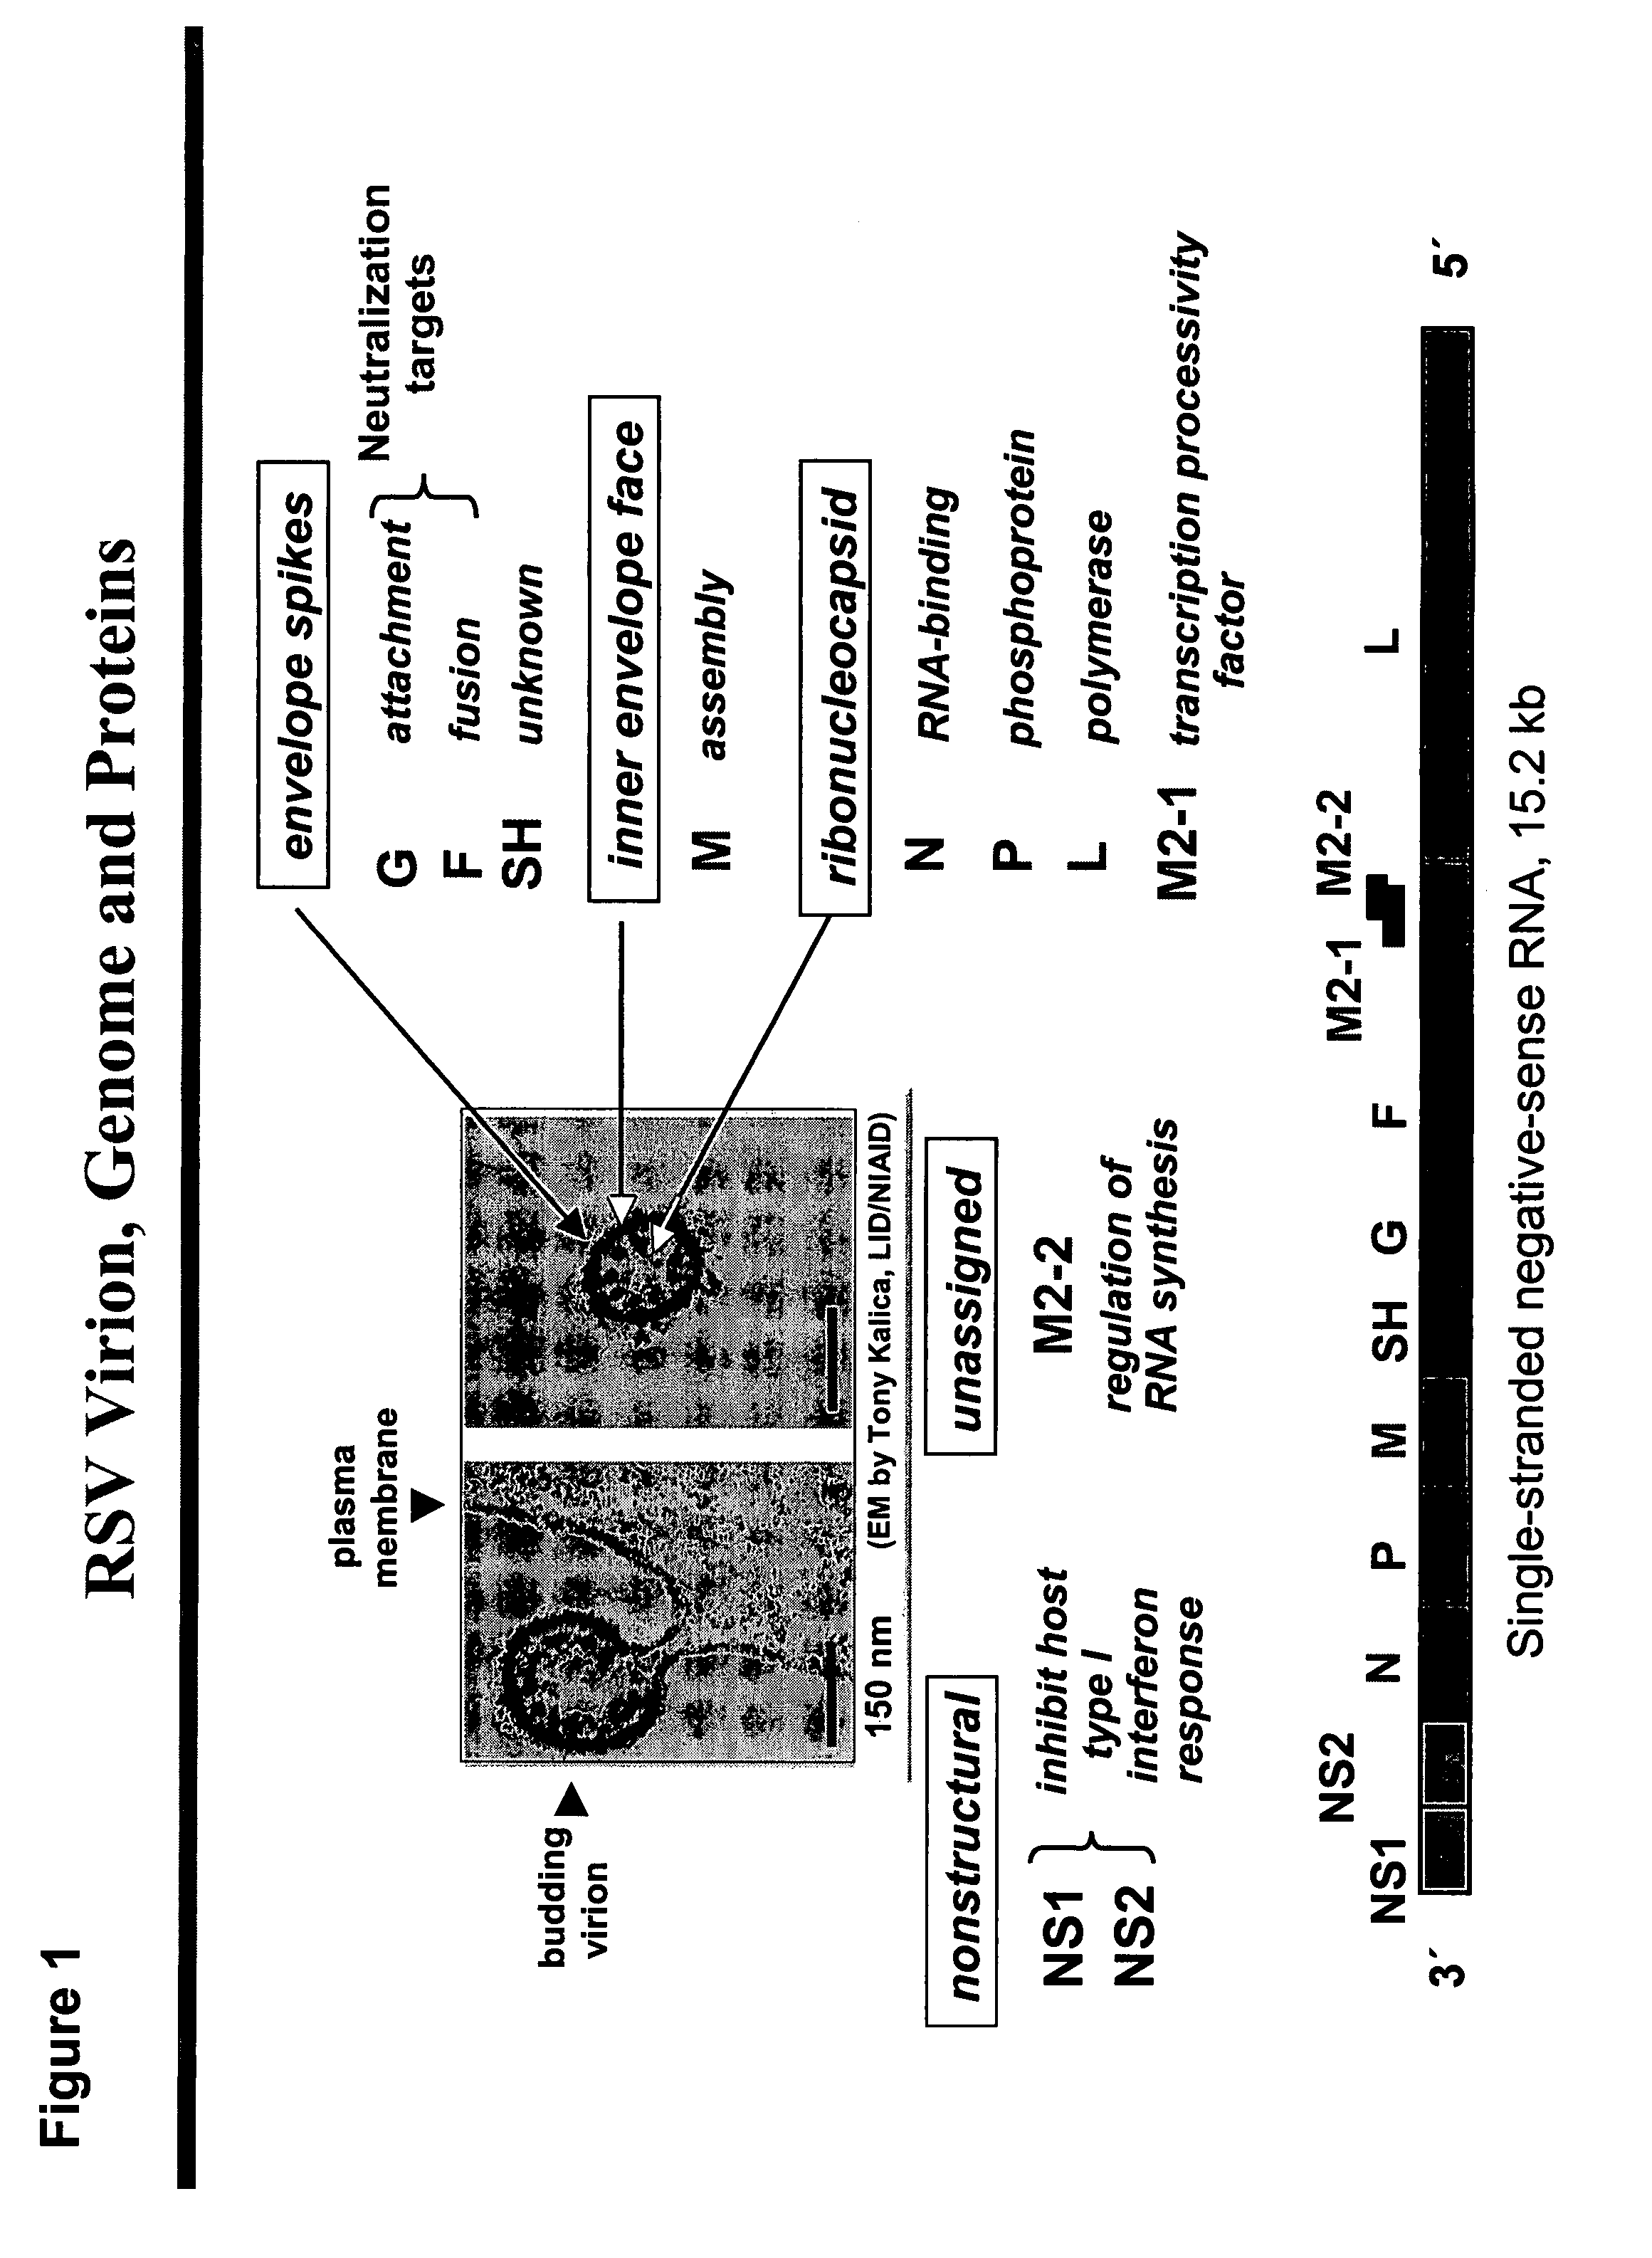 Codon modified immunogenic compositions and methods of use